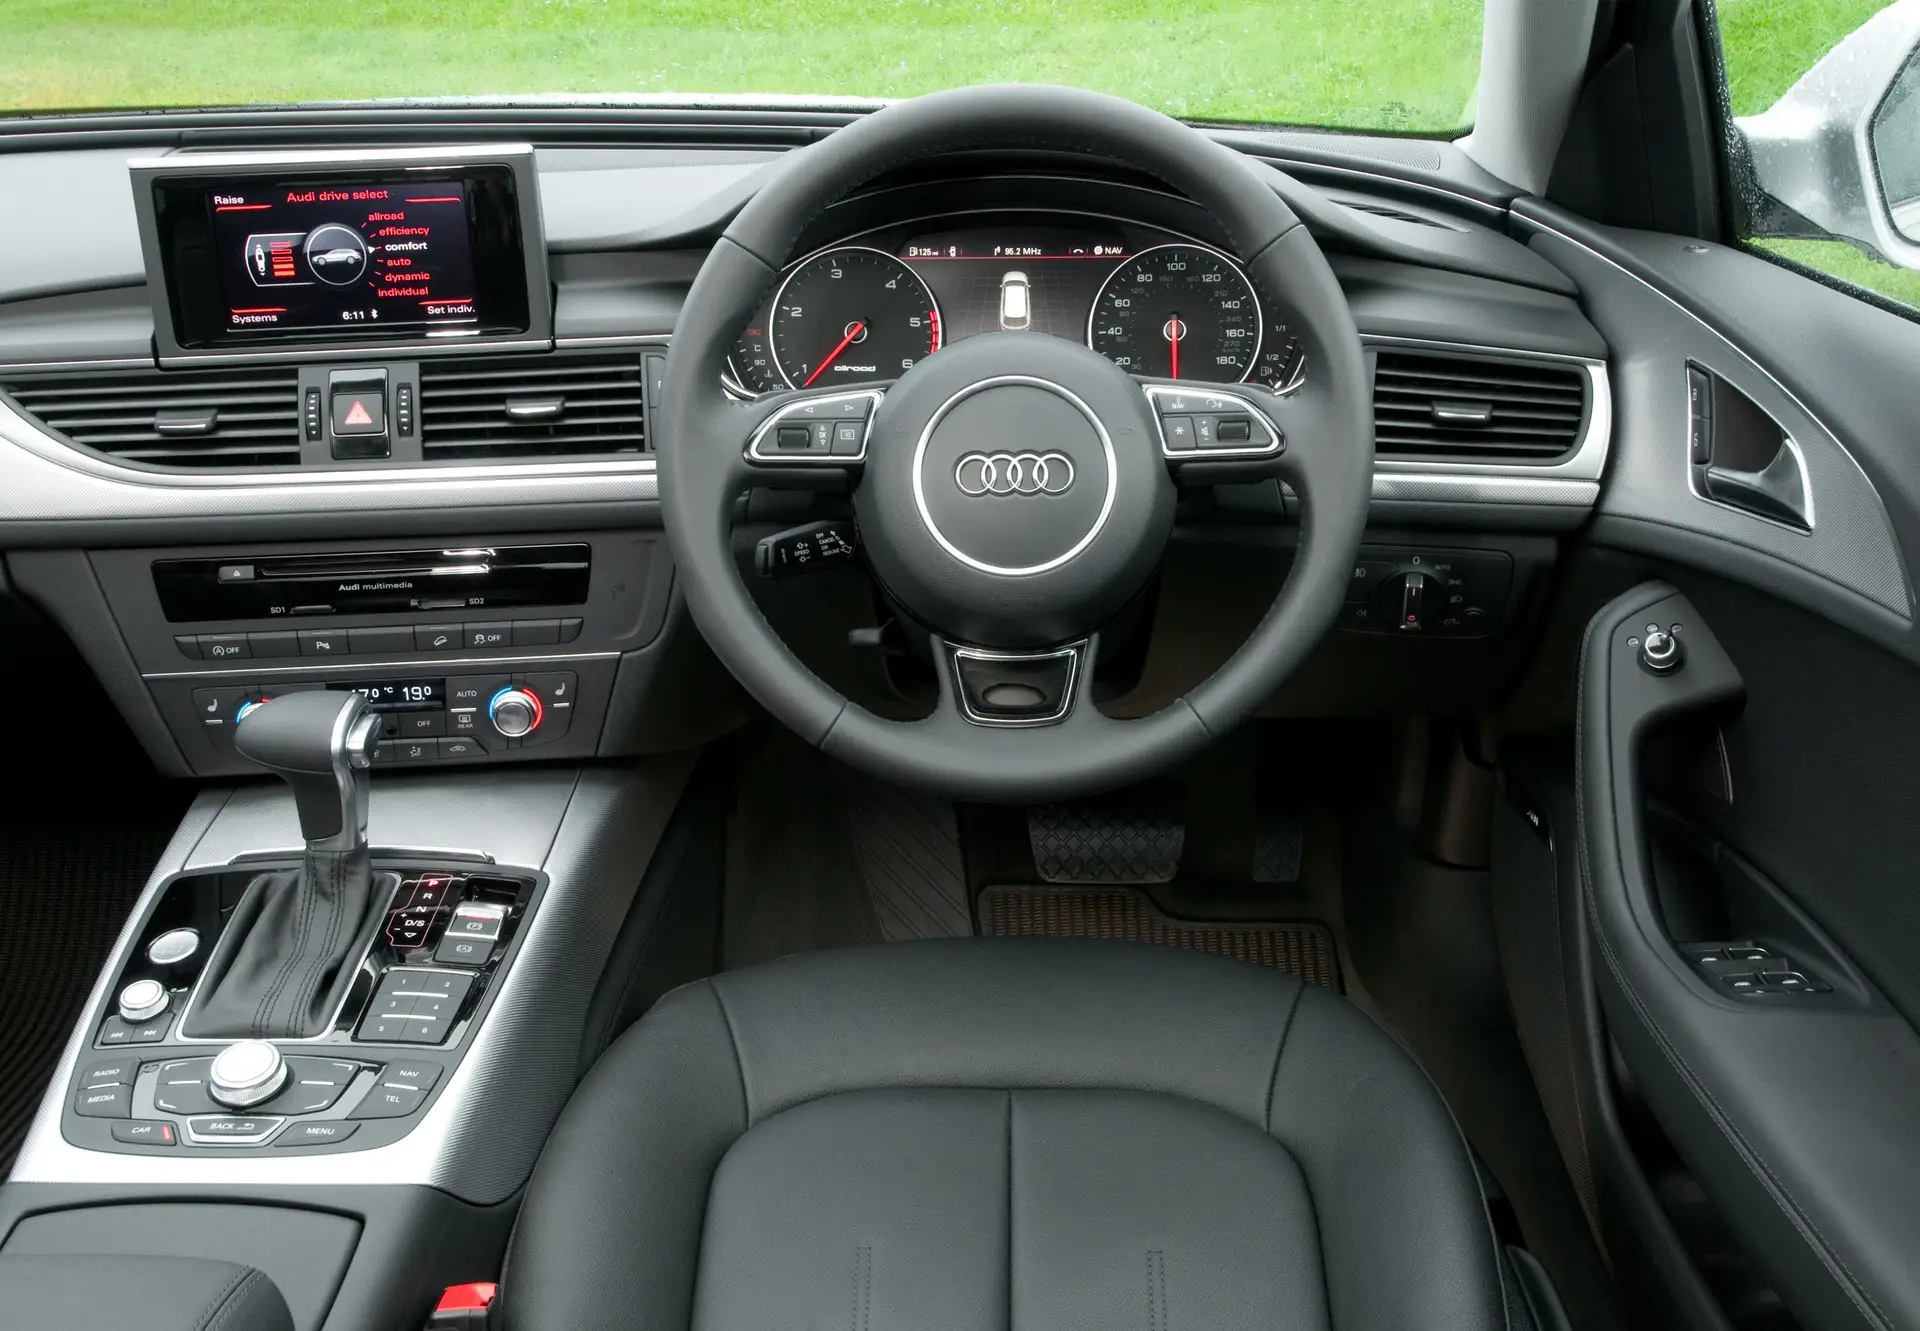 Audi A6 Allroad (2012-2018) Review: Interior close up photo of the Audi A6 Allroad dashboard